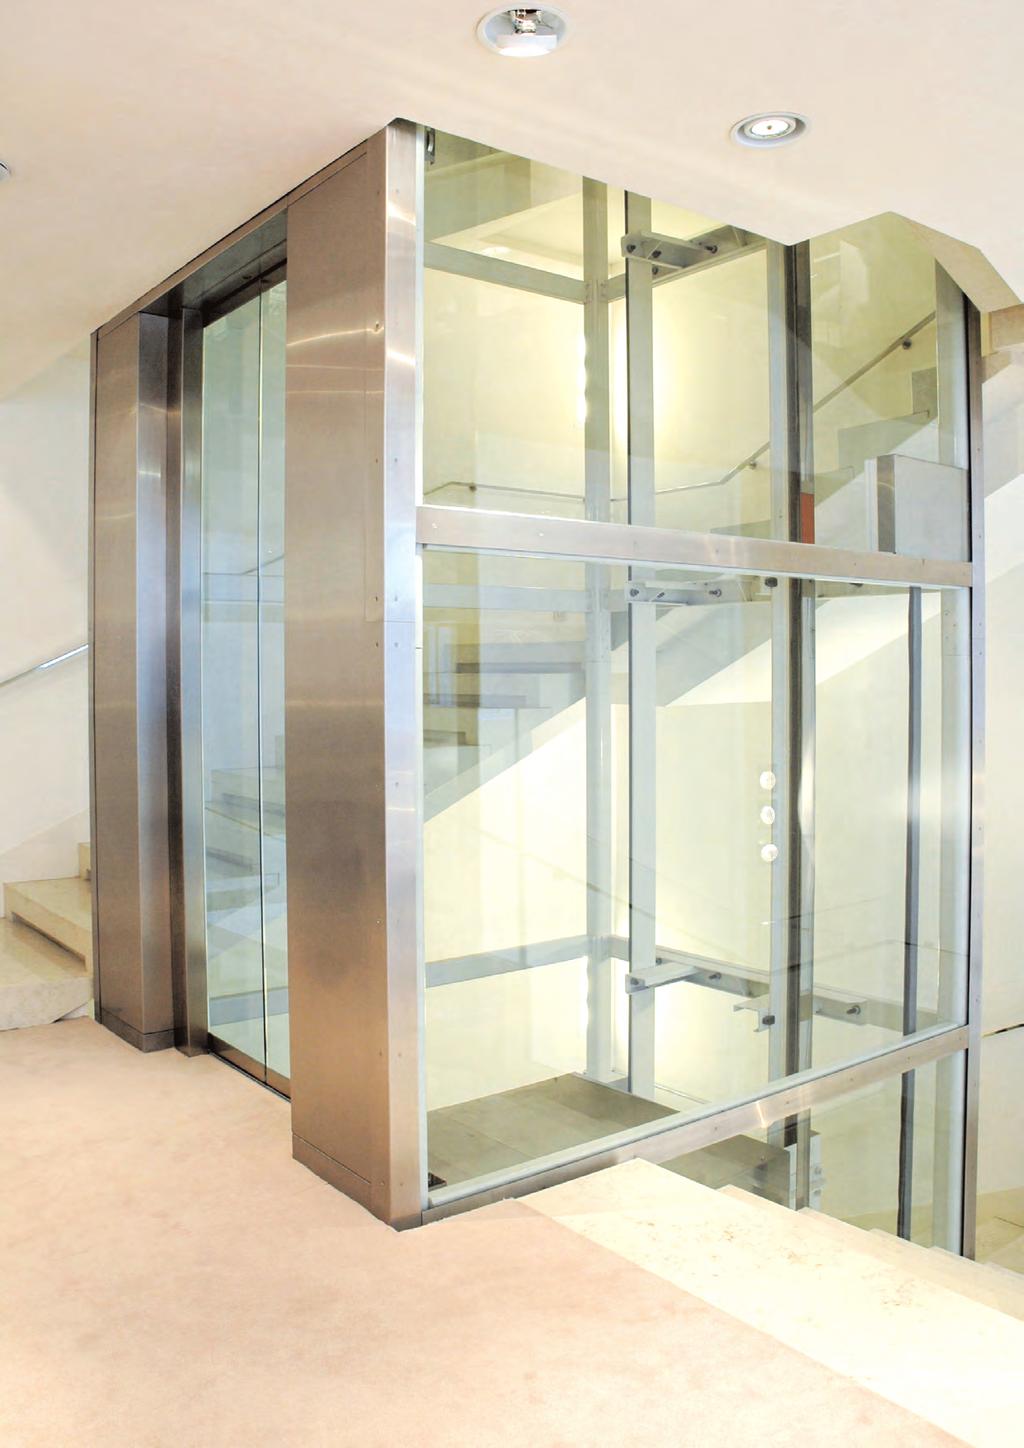 Swallow Lifts Custom Lifts Custom Lifts, purpose designed lifts, small lift shafts, high specification materials,